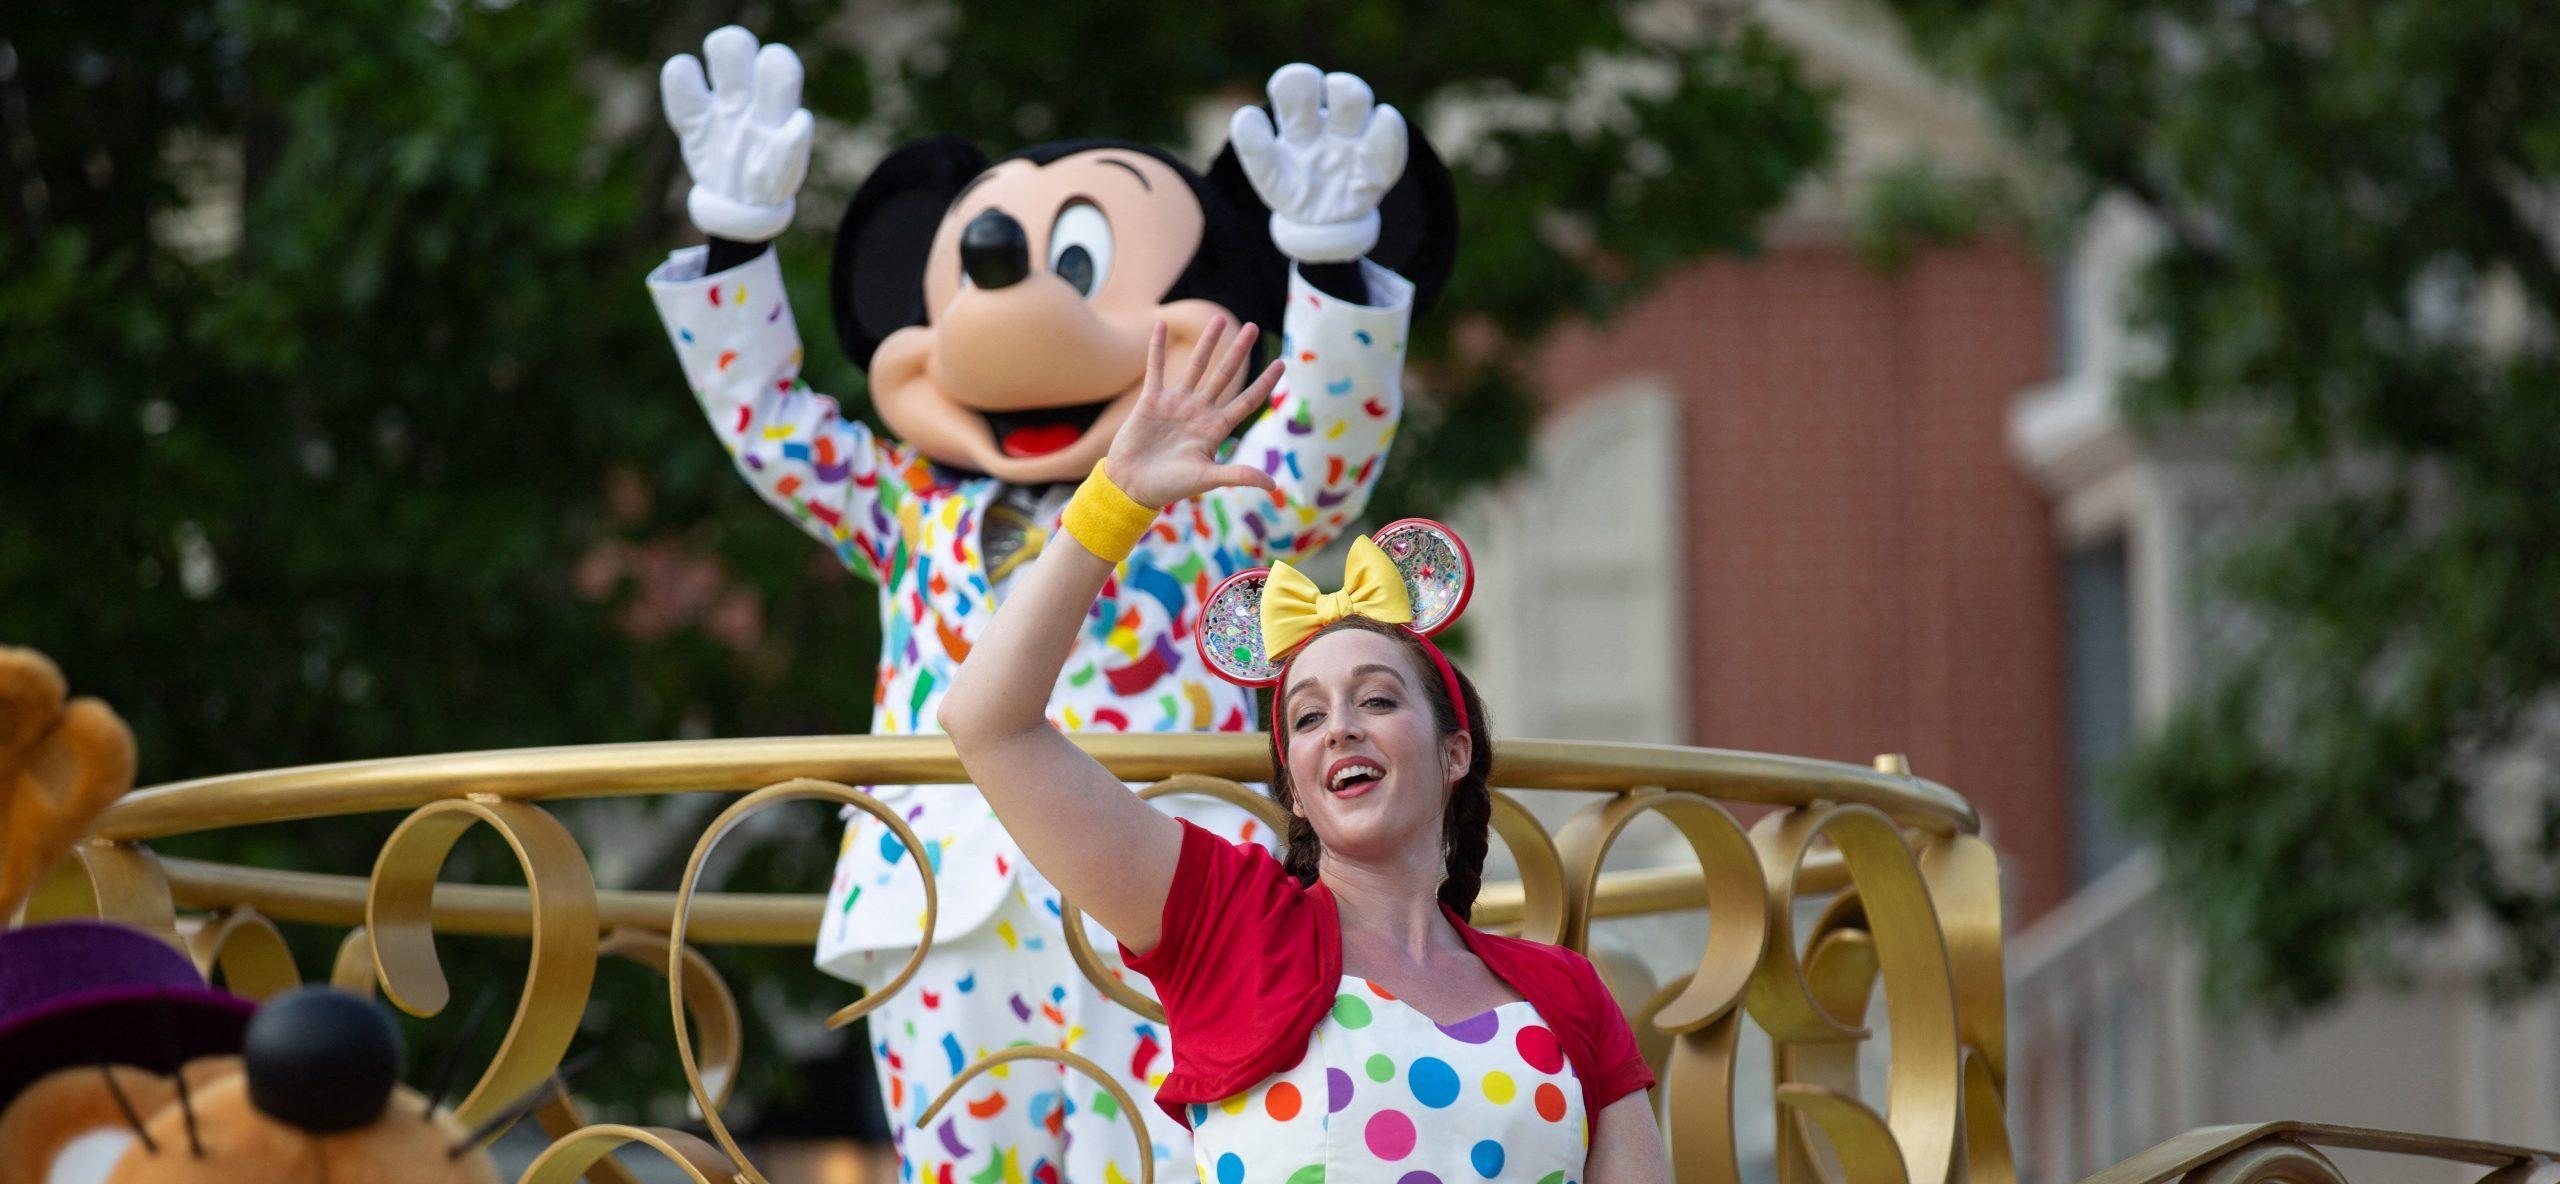 Pay Increase Announced For Disney College Program Participants!